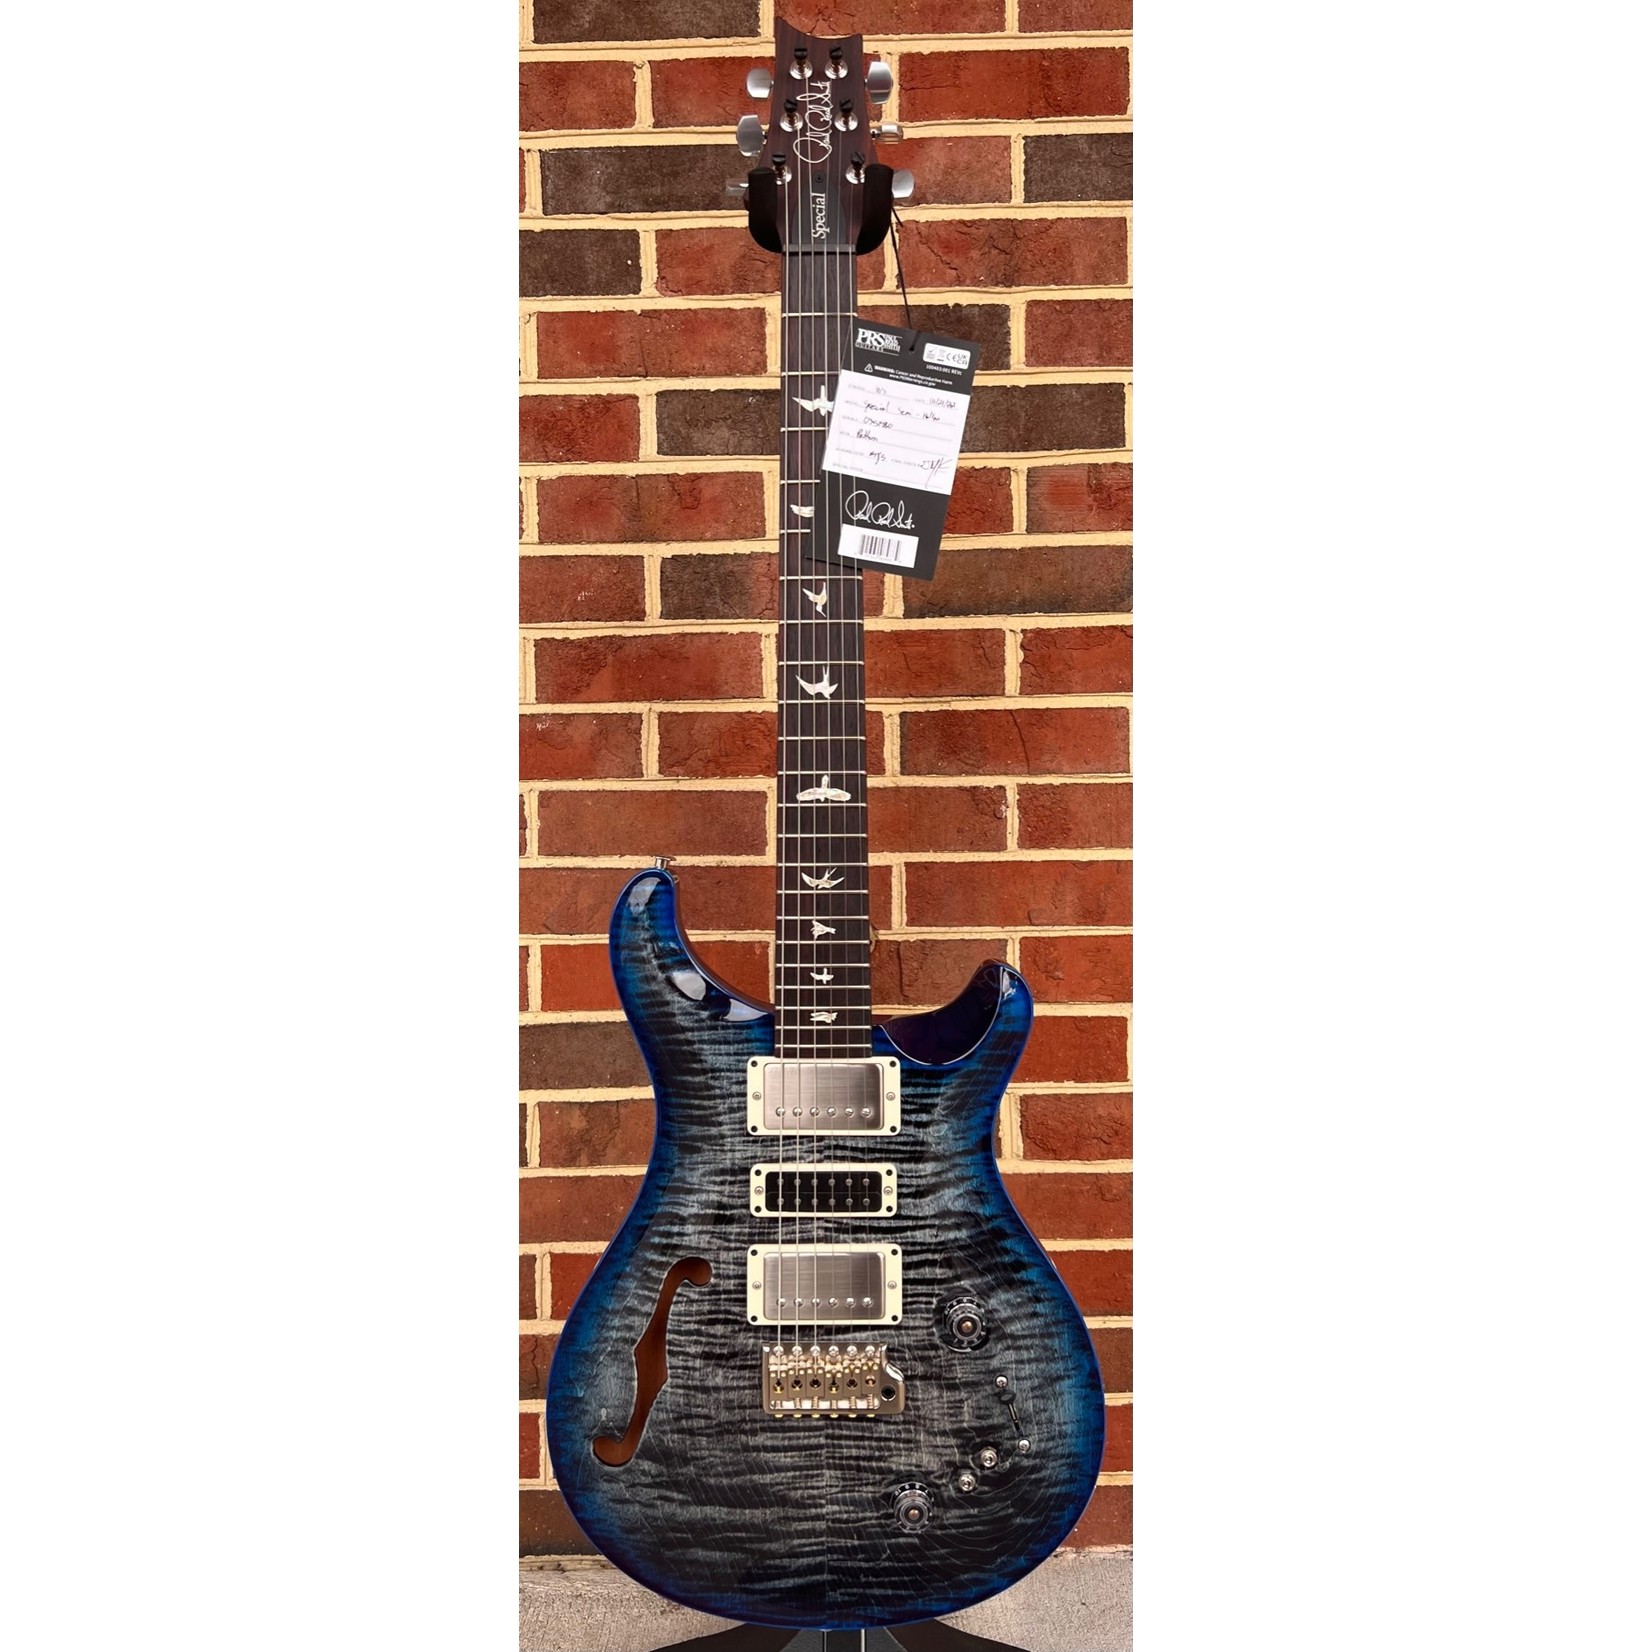 Paul Reed Smith Paul Reed Smith Special Semi-Hollow, Custom Color - Charcoal Blue Wrap Burst, Nickel Hardware, Hardshell Case